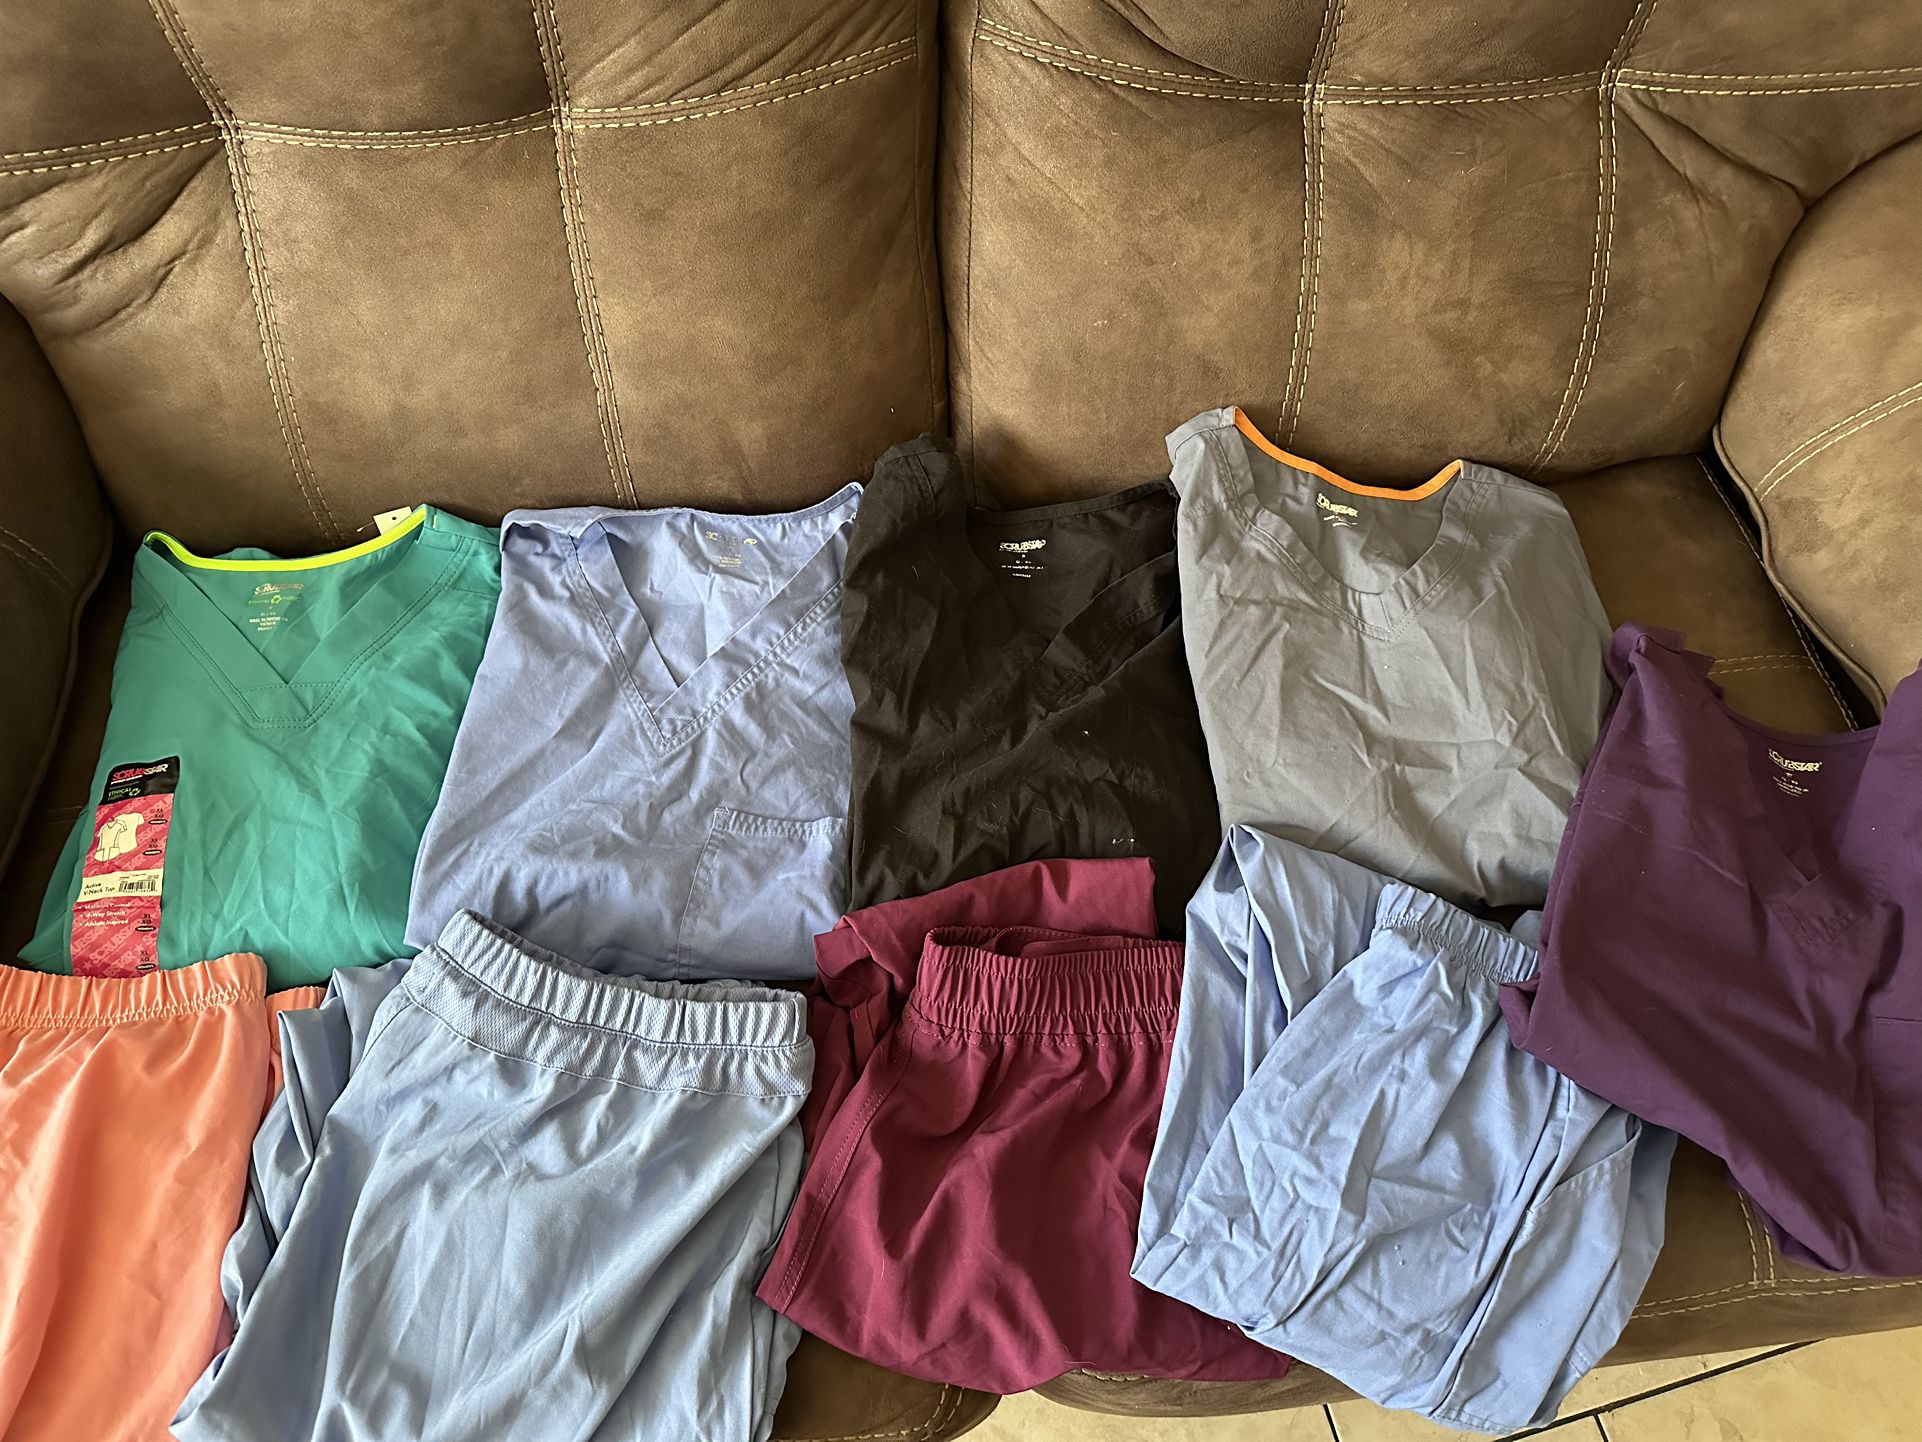 Women’s scrubs size XL. Mix of new, new without tags and used